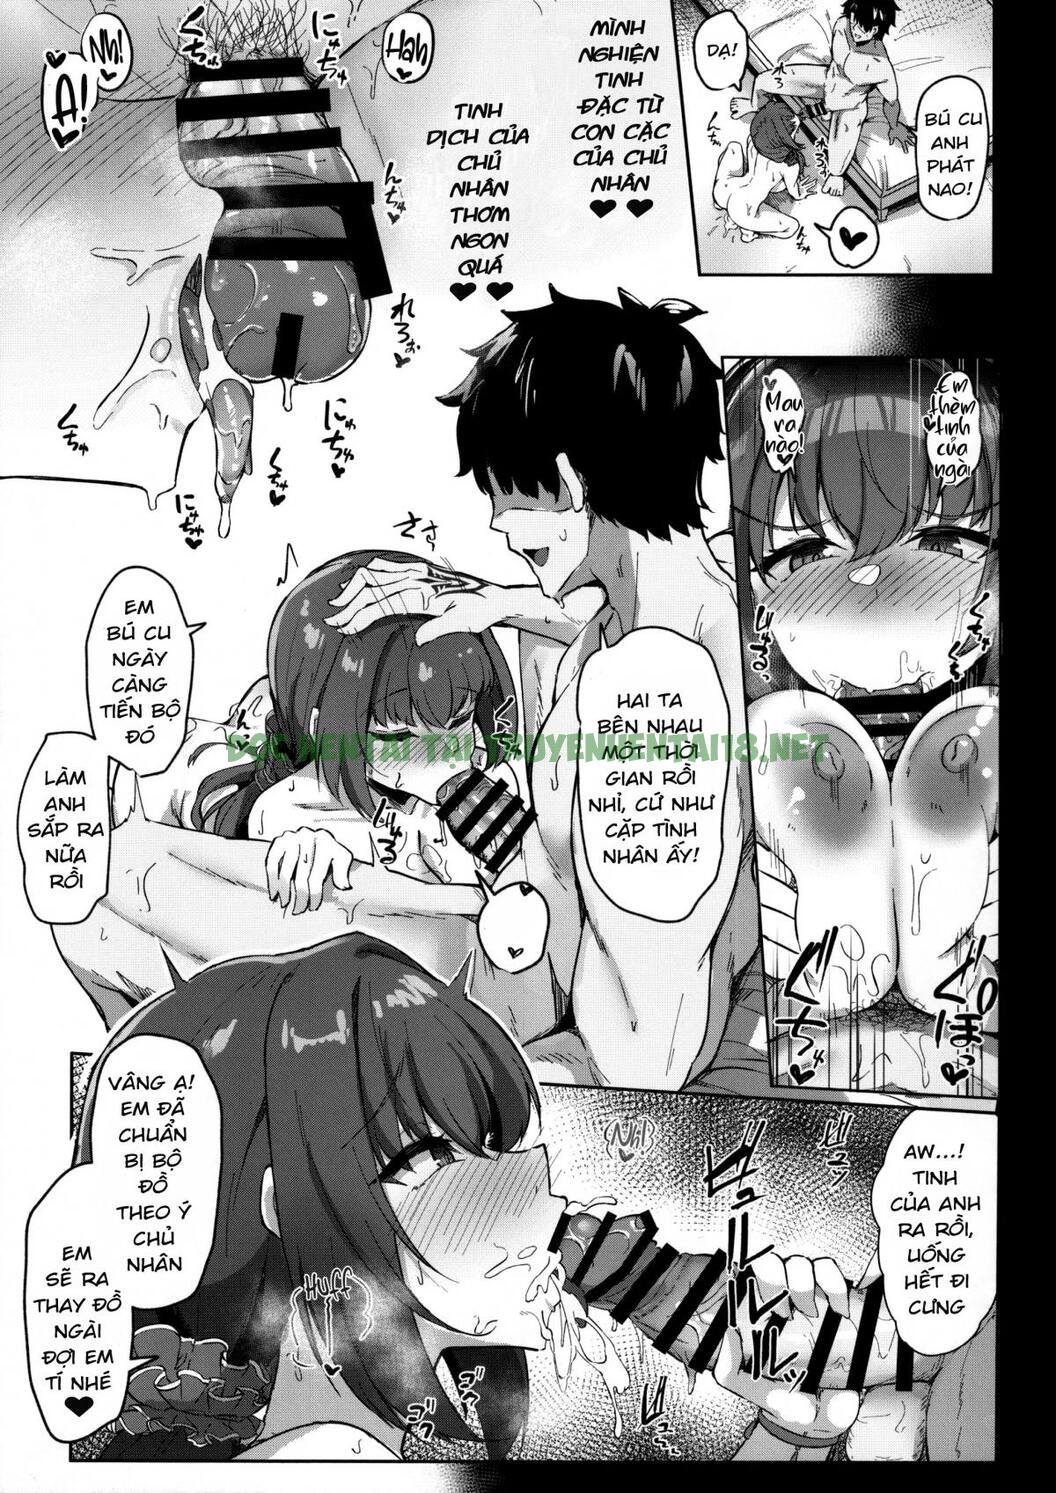 Xem ảnh Chaldea Midsummer Vacation. Marrying And Mana Transferring With Bride Skad - One Shot - 18 - Hentai24h.Tv